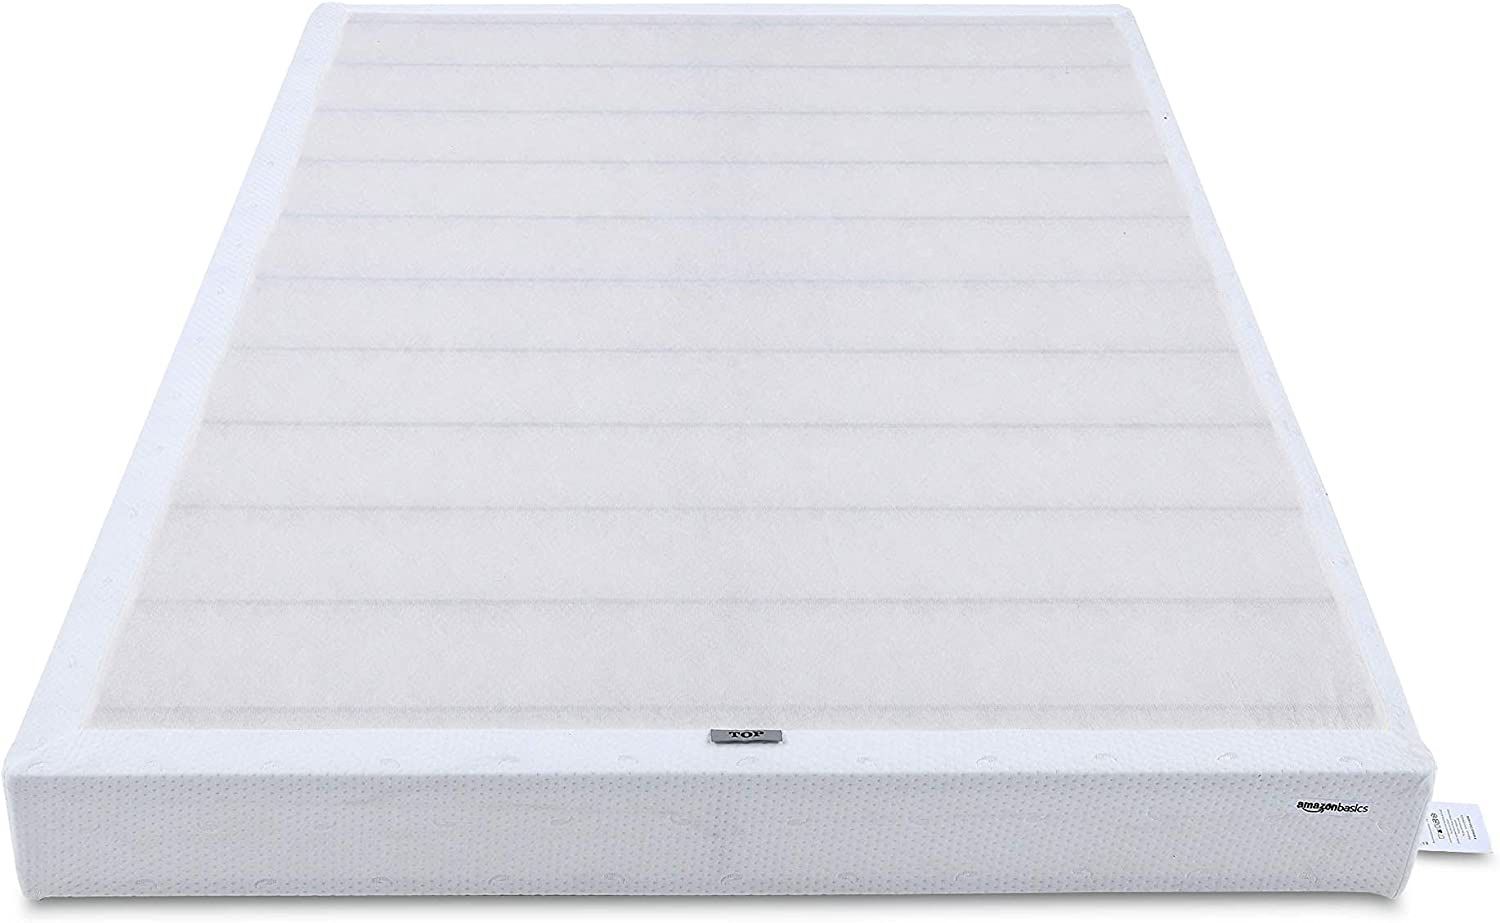 Smart Box Spring Bed Base, 5 - Inch Mattress Foundation - TWIN SIZE, Tool - Free Easy Assembly